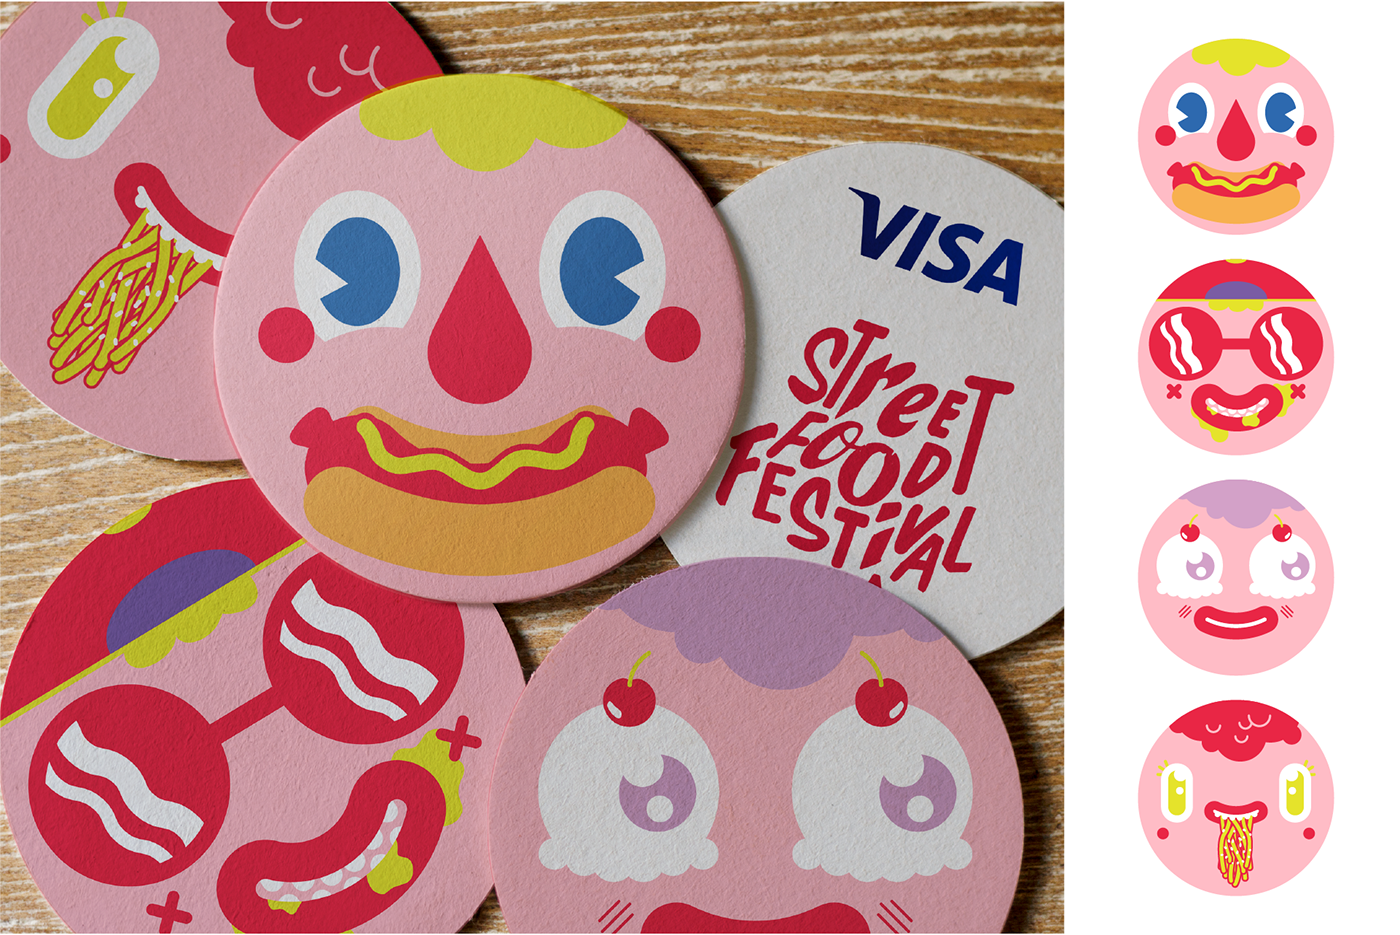 branding  logo ILLUSTRATION  Food  Street festival south africa characters colours